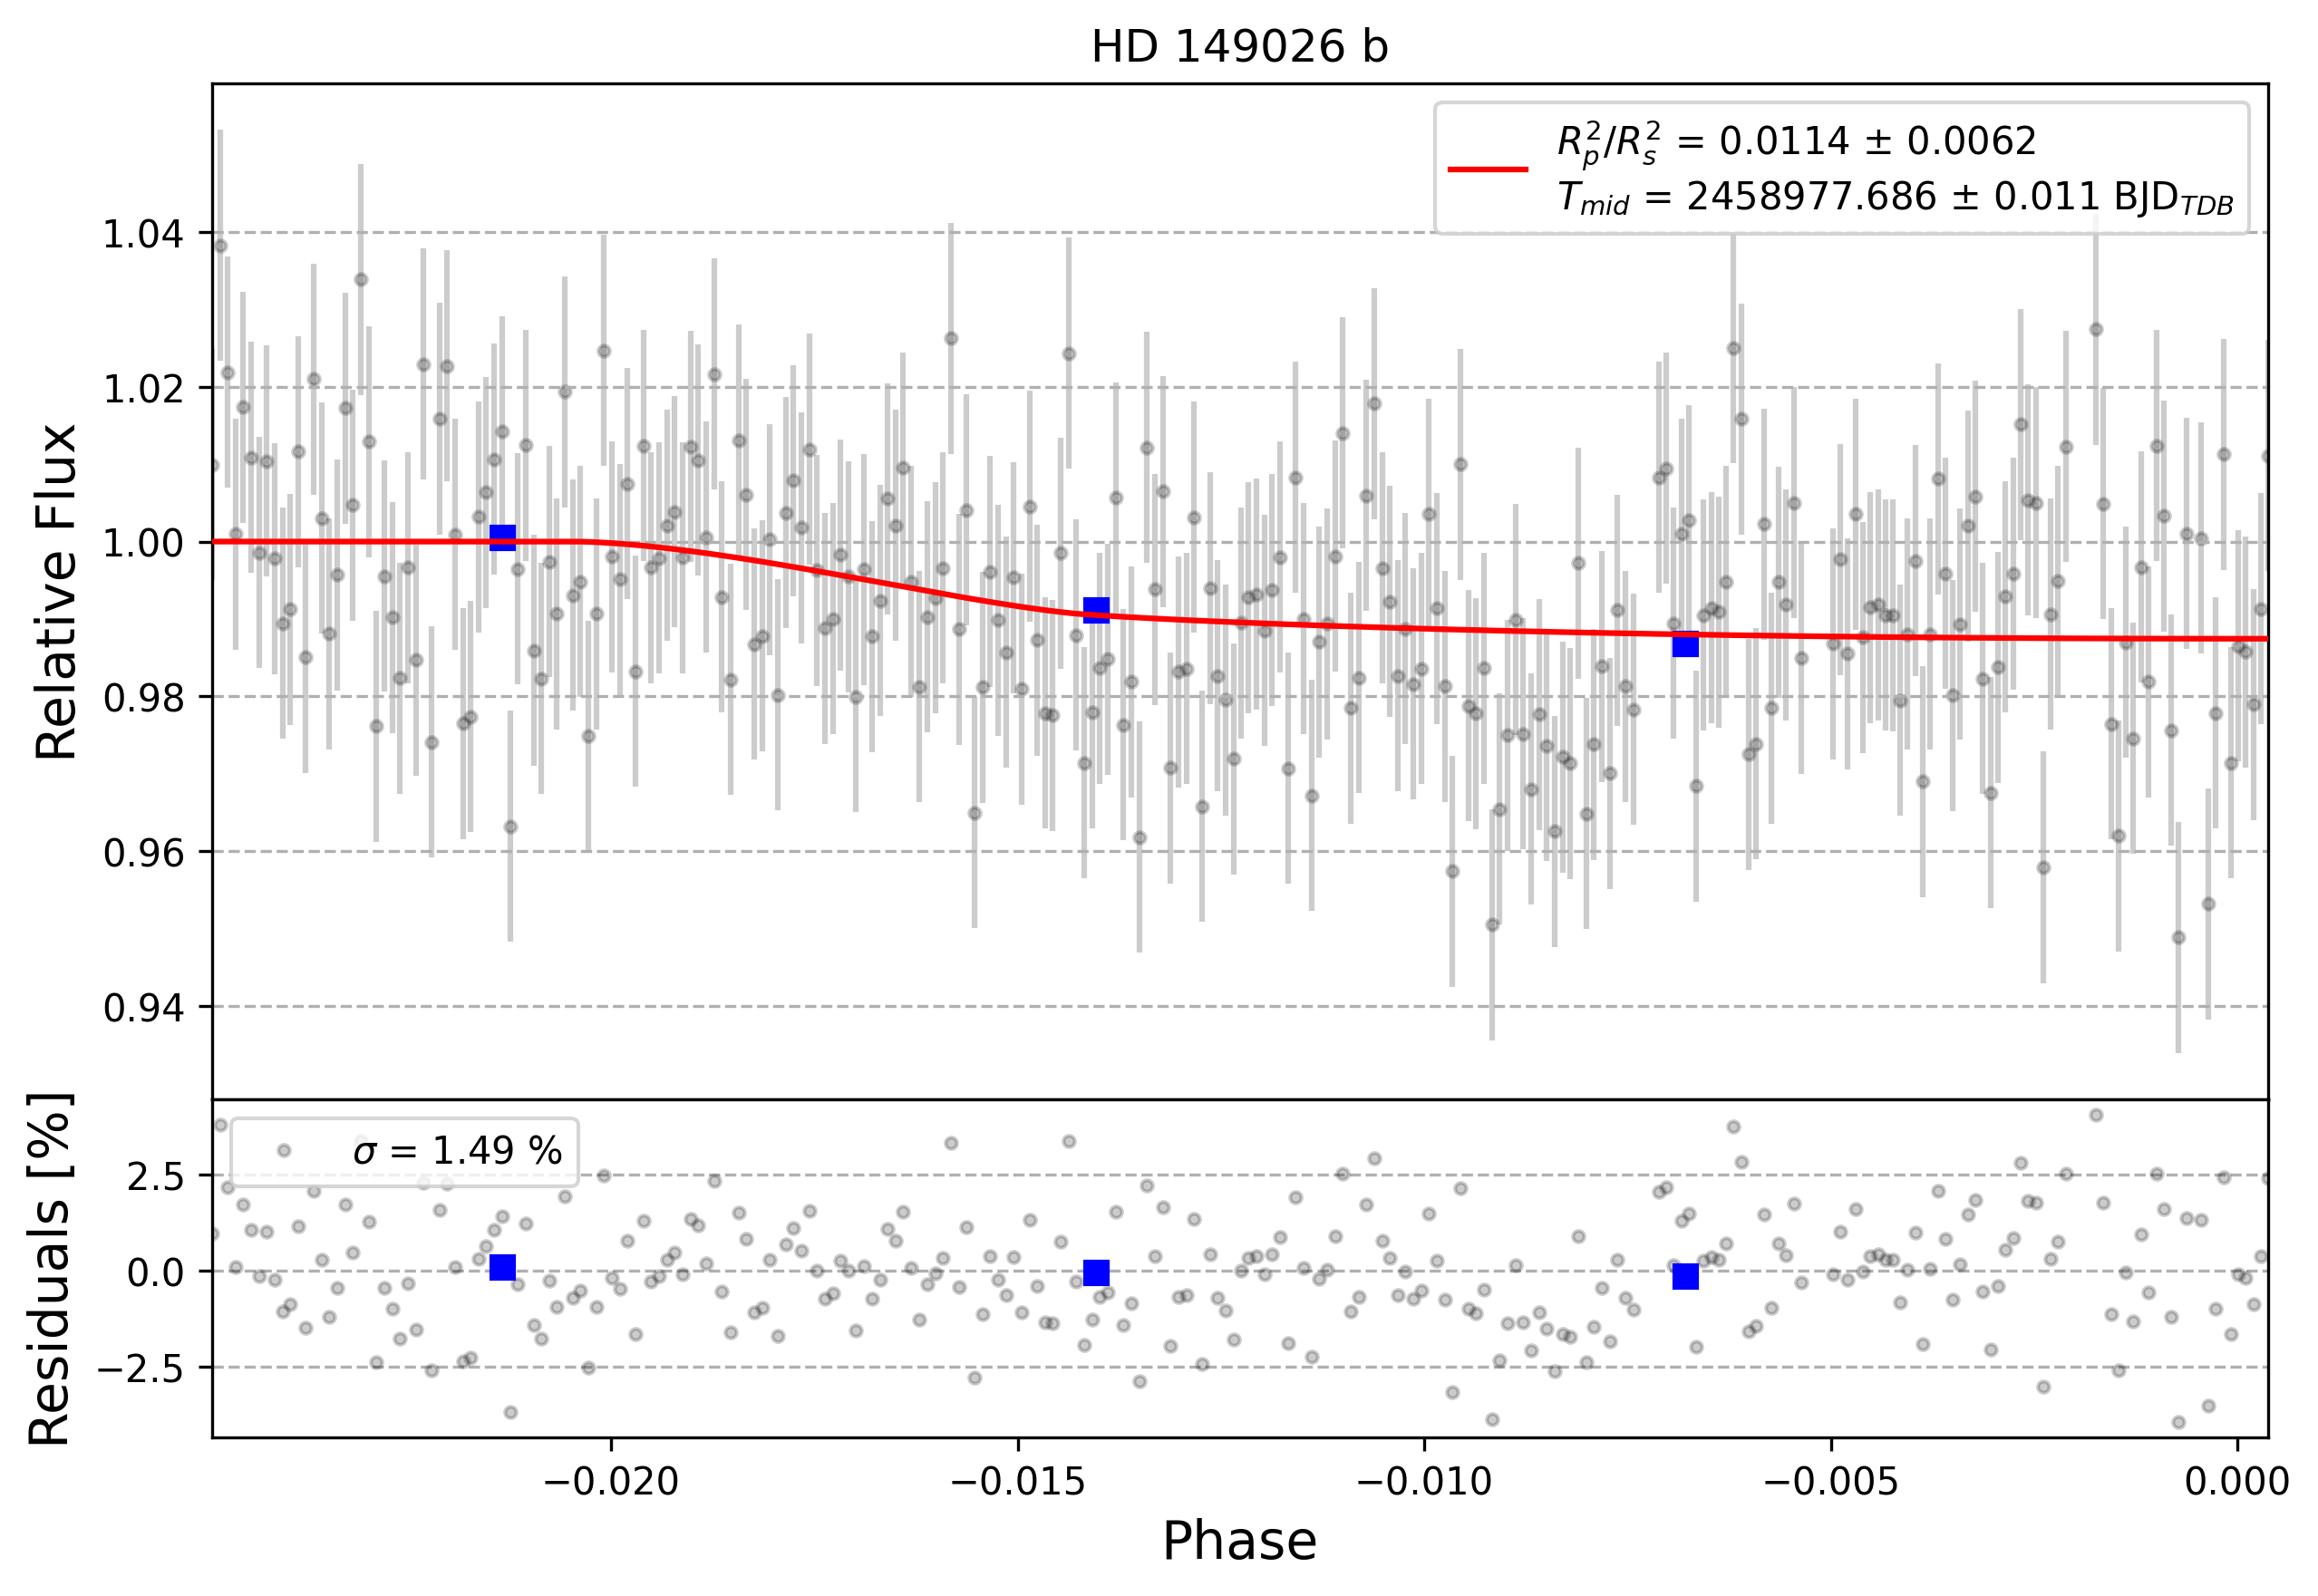 Light curve chart for 0000600